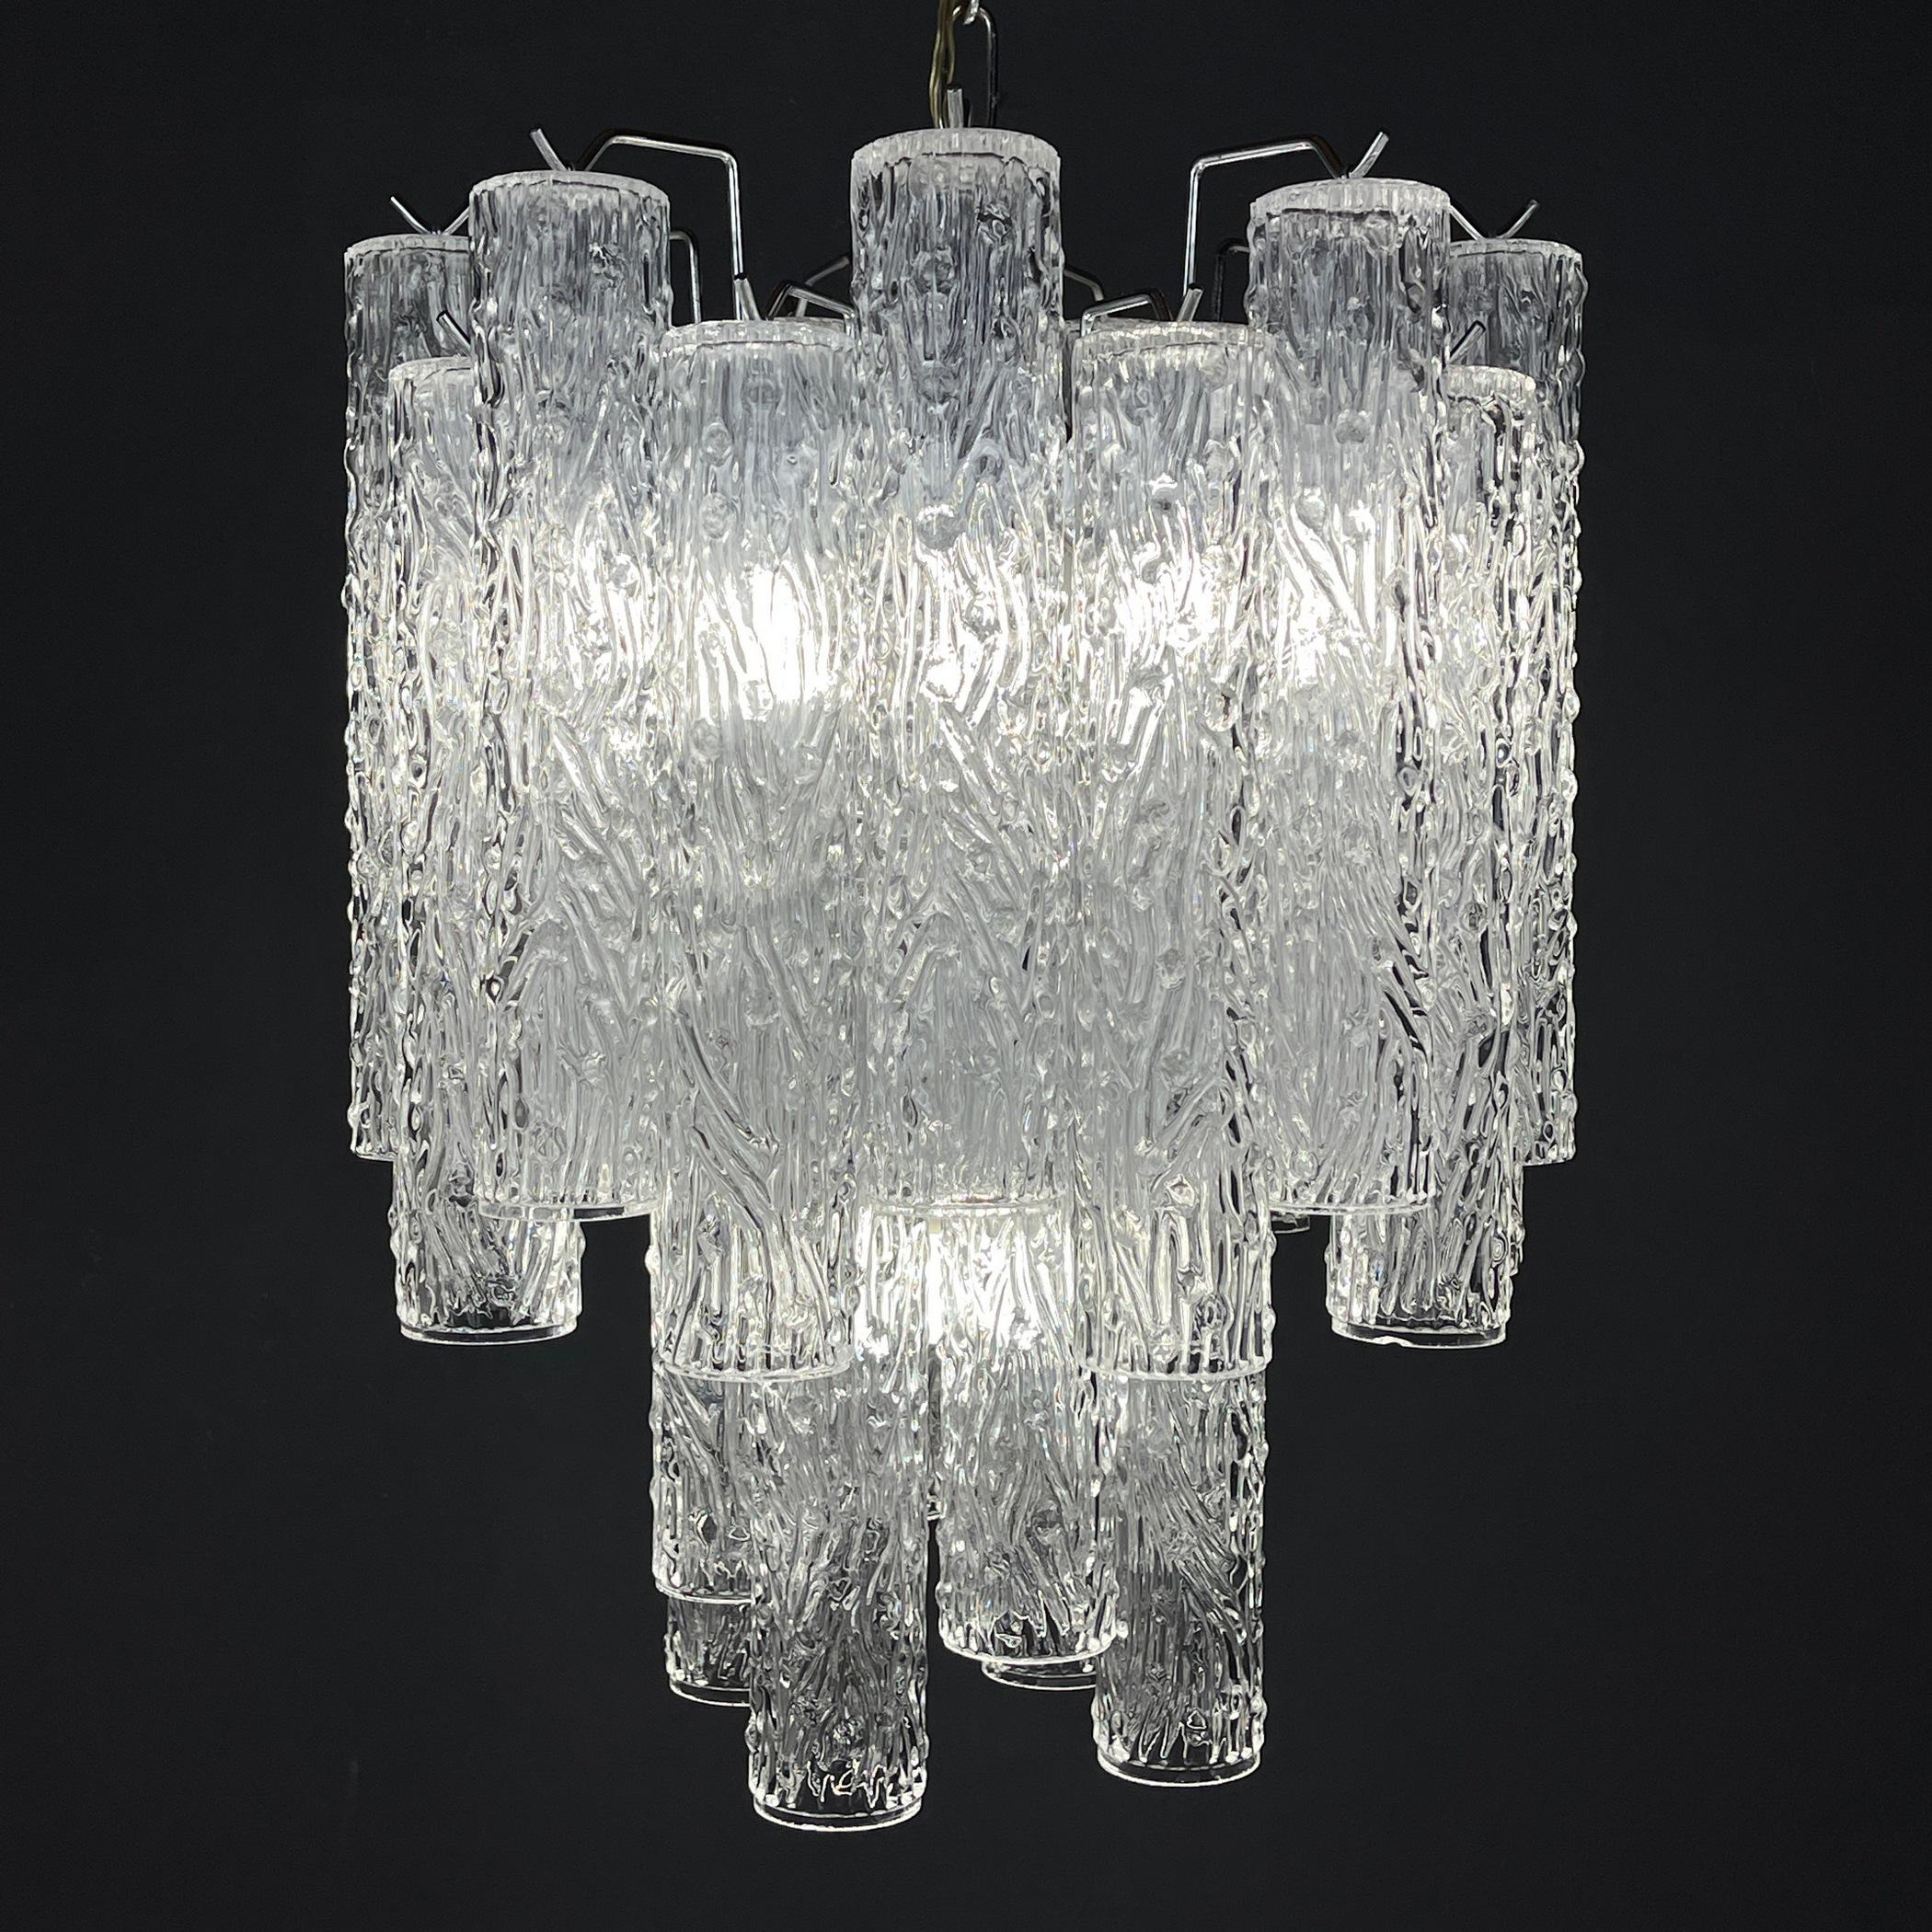 Midcentury Murano Glass Chandelier Tronchi by Toni Zuccheri for Venini Italy 19 For Sale 6